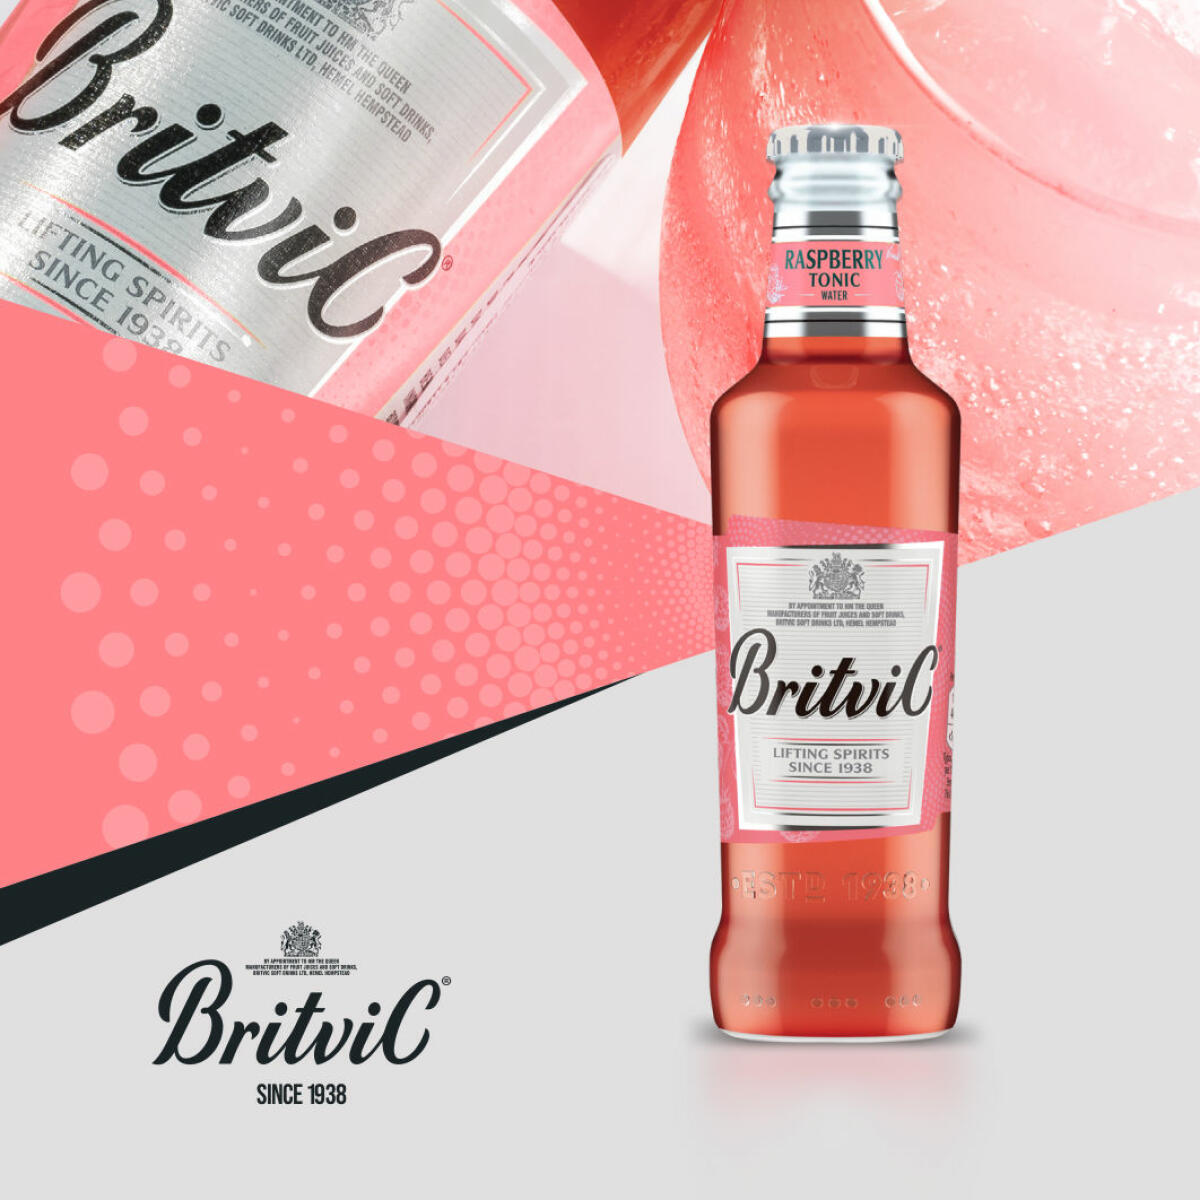 Britvic mixers introduces fruity twist with pink Raspberry Tonic